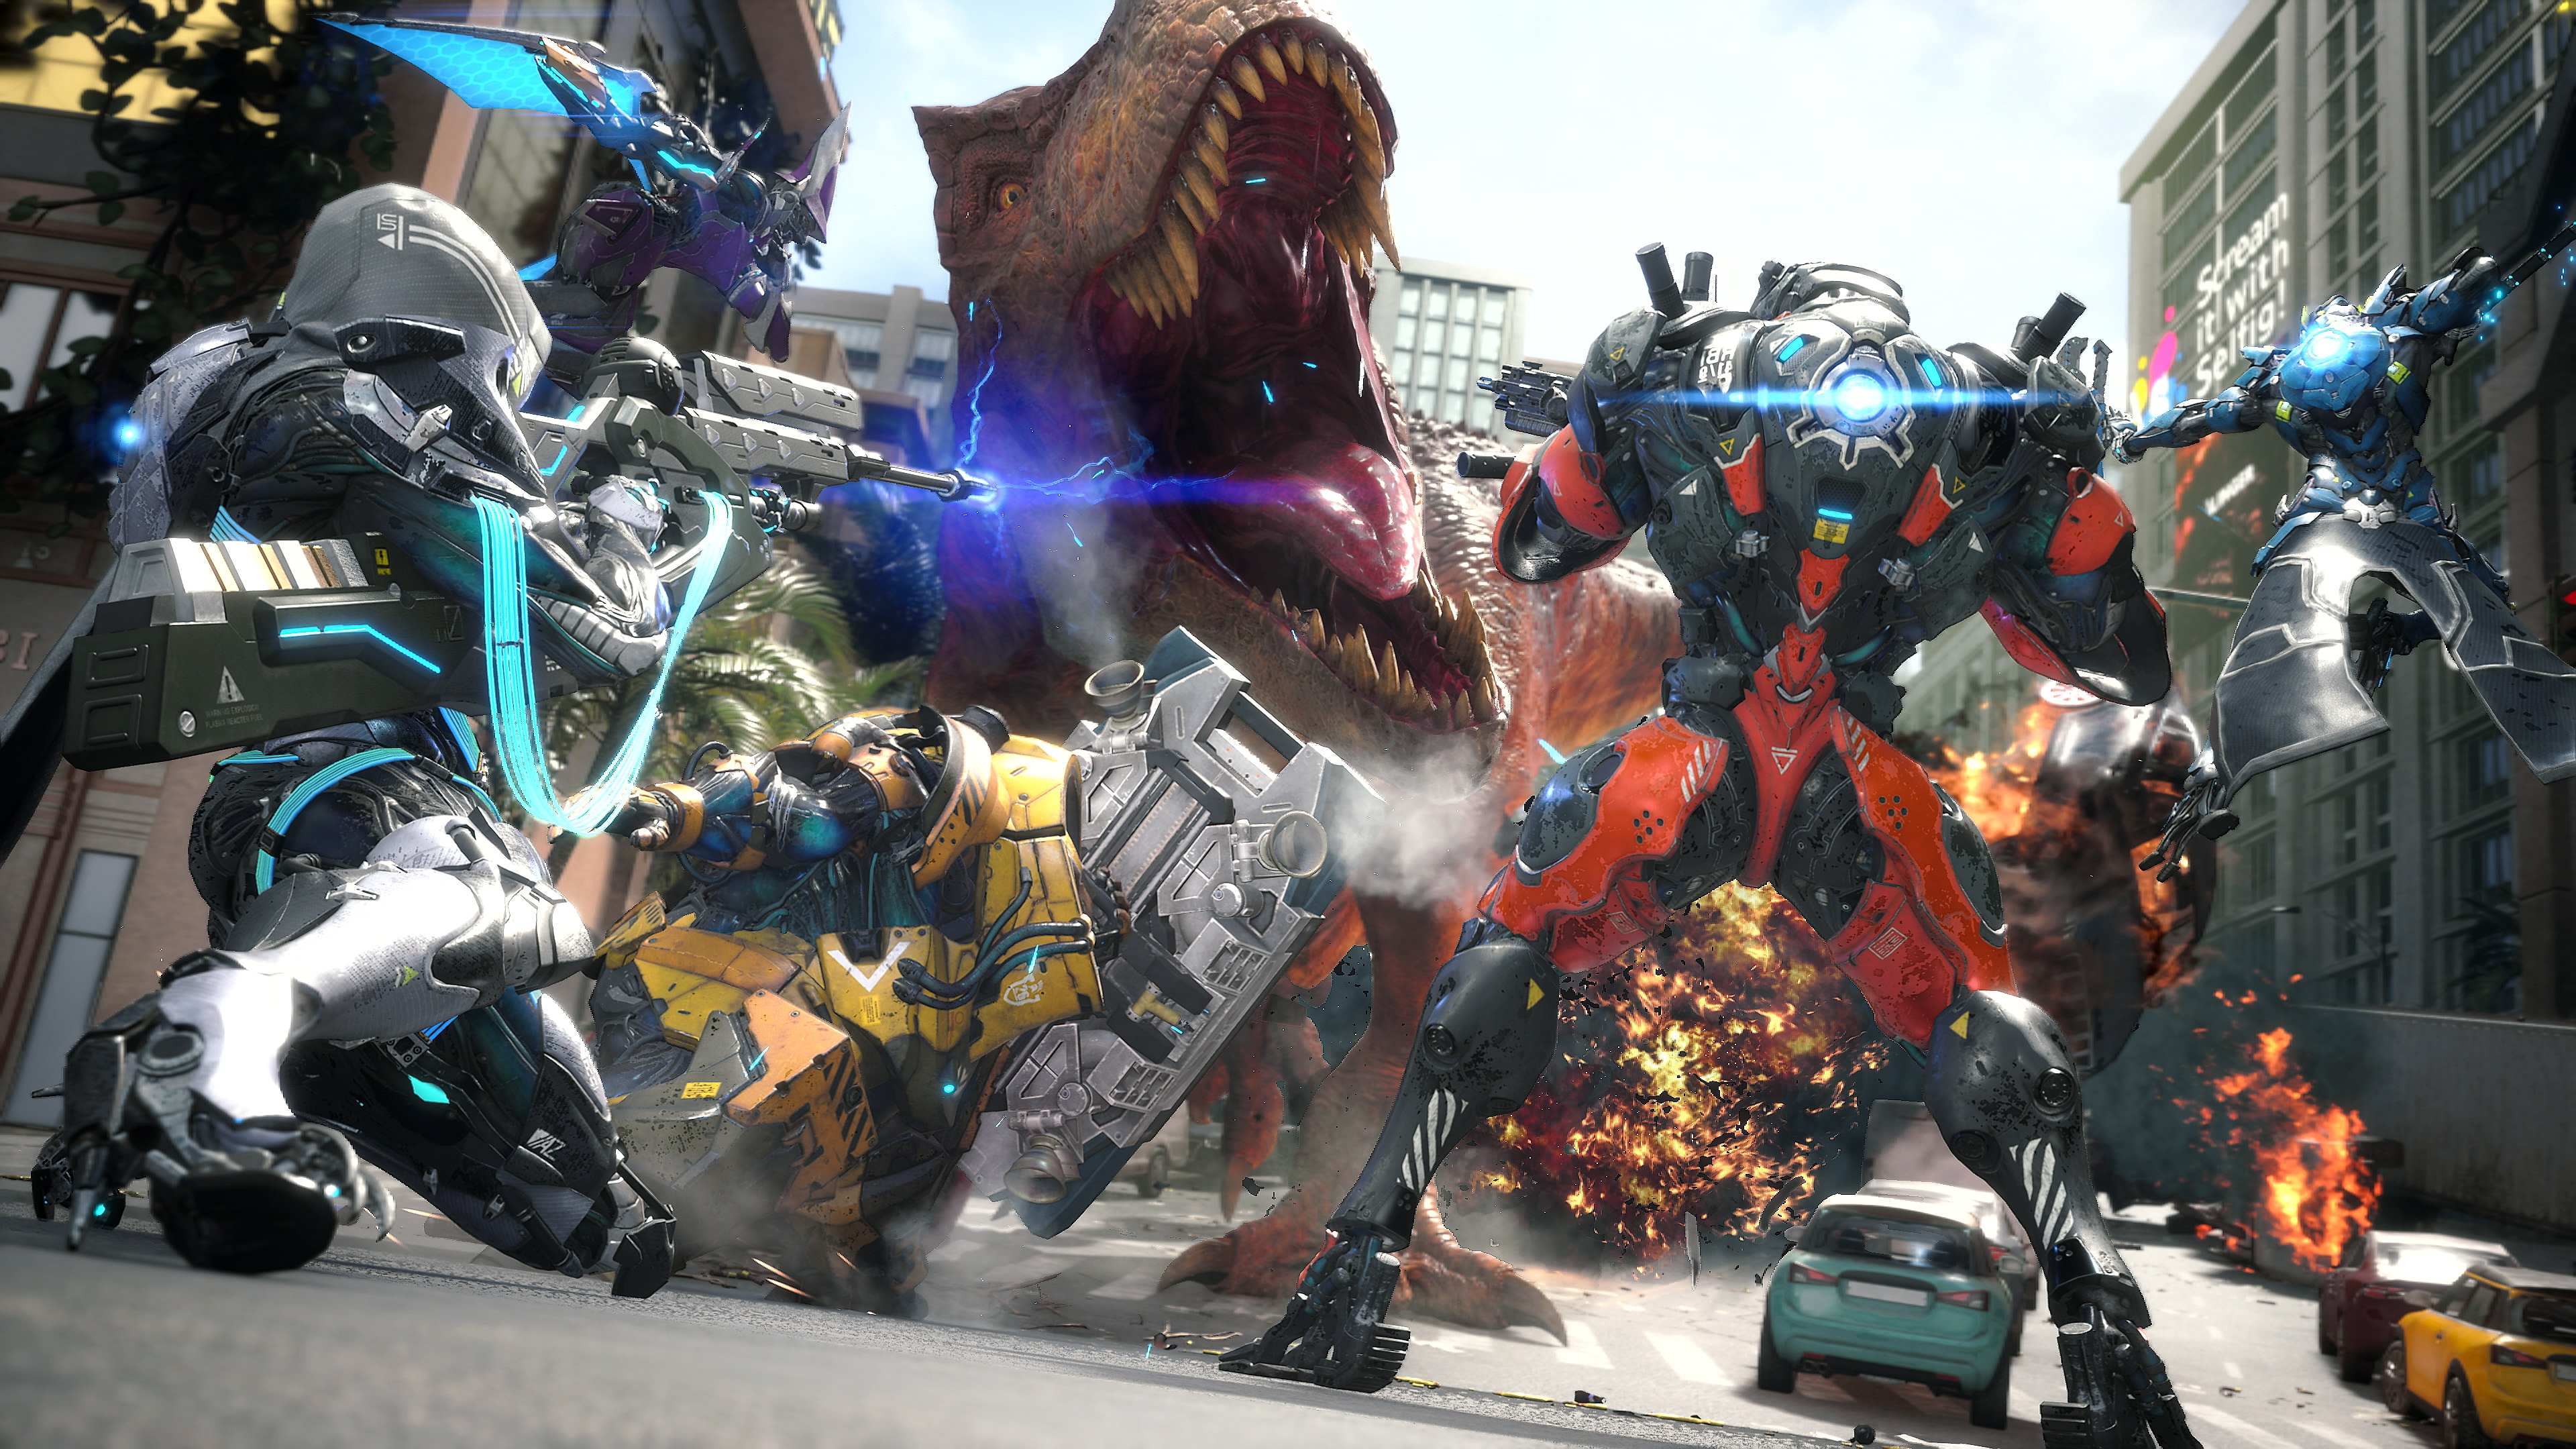 Exoprimal screenshot showing a T-Rex attacking mech-style characters known as Exosuits